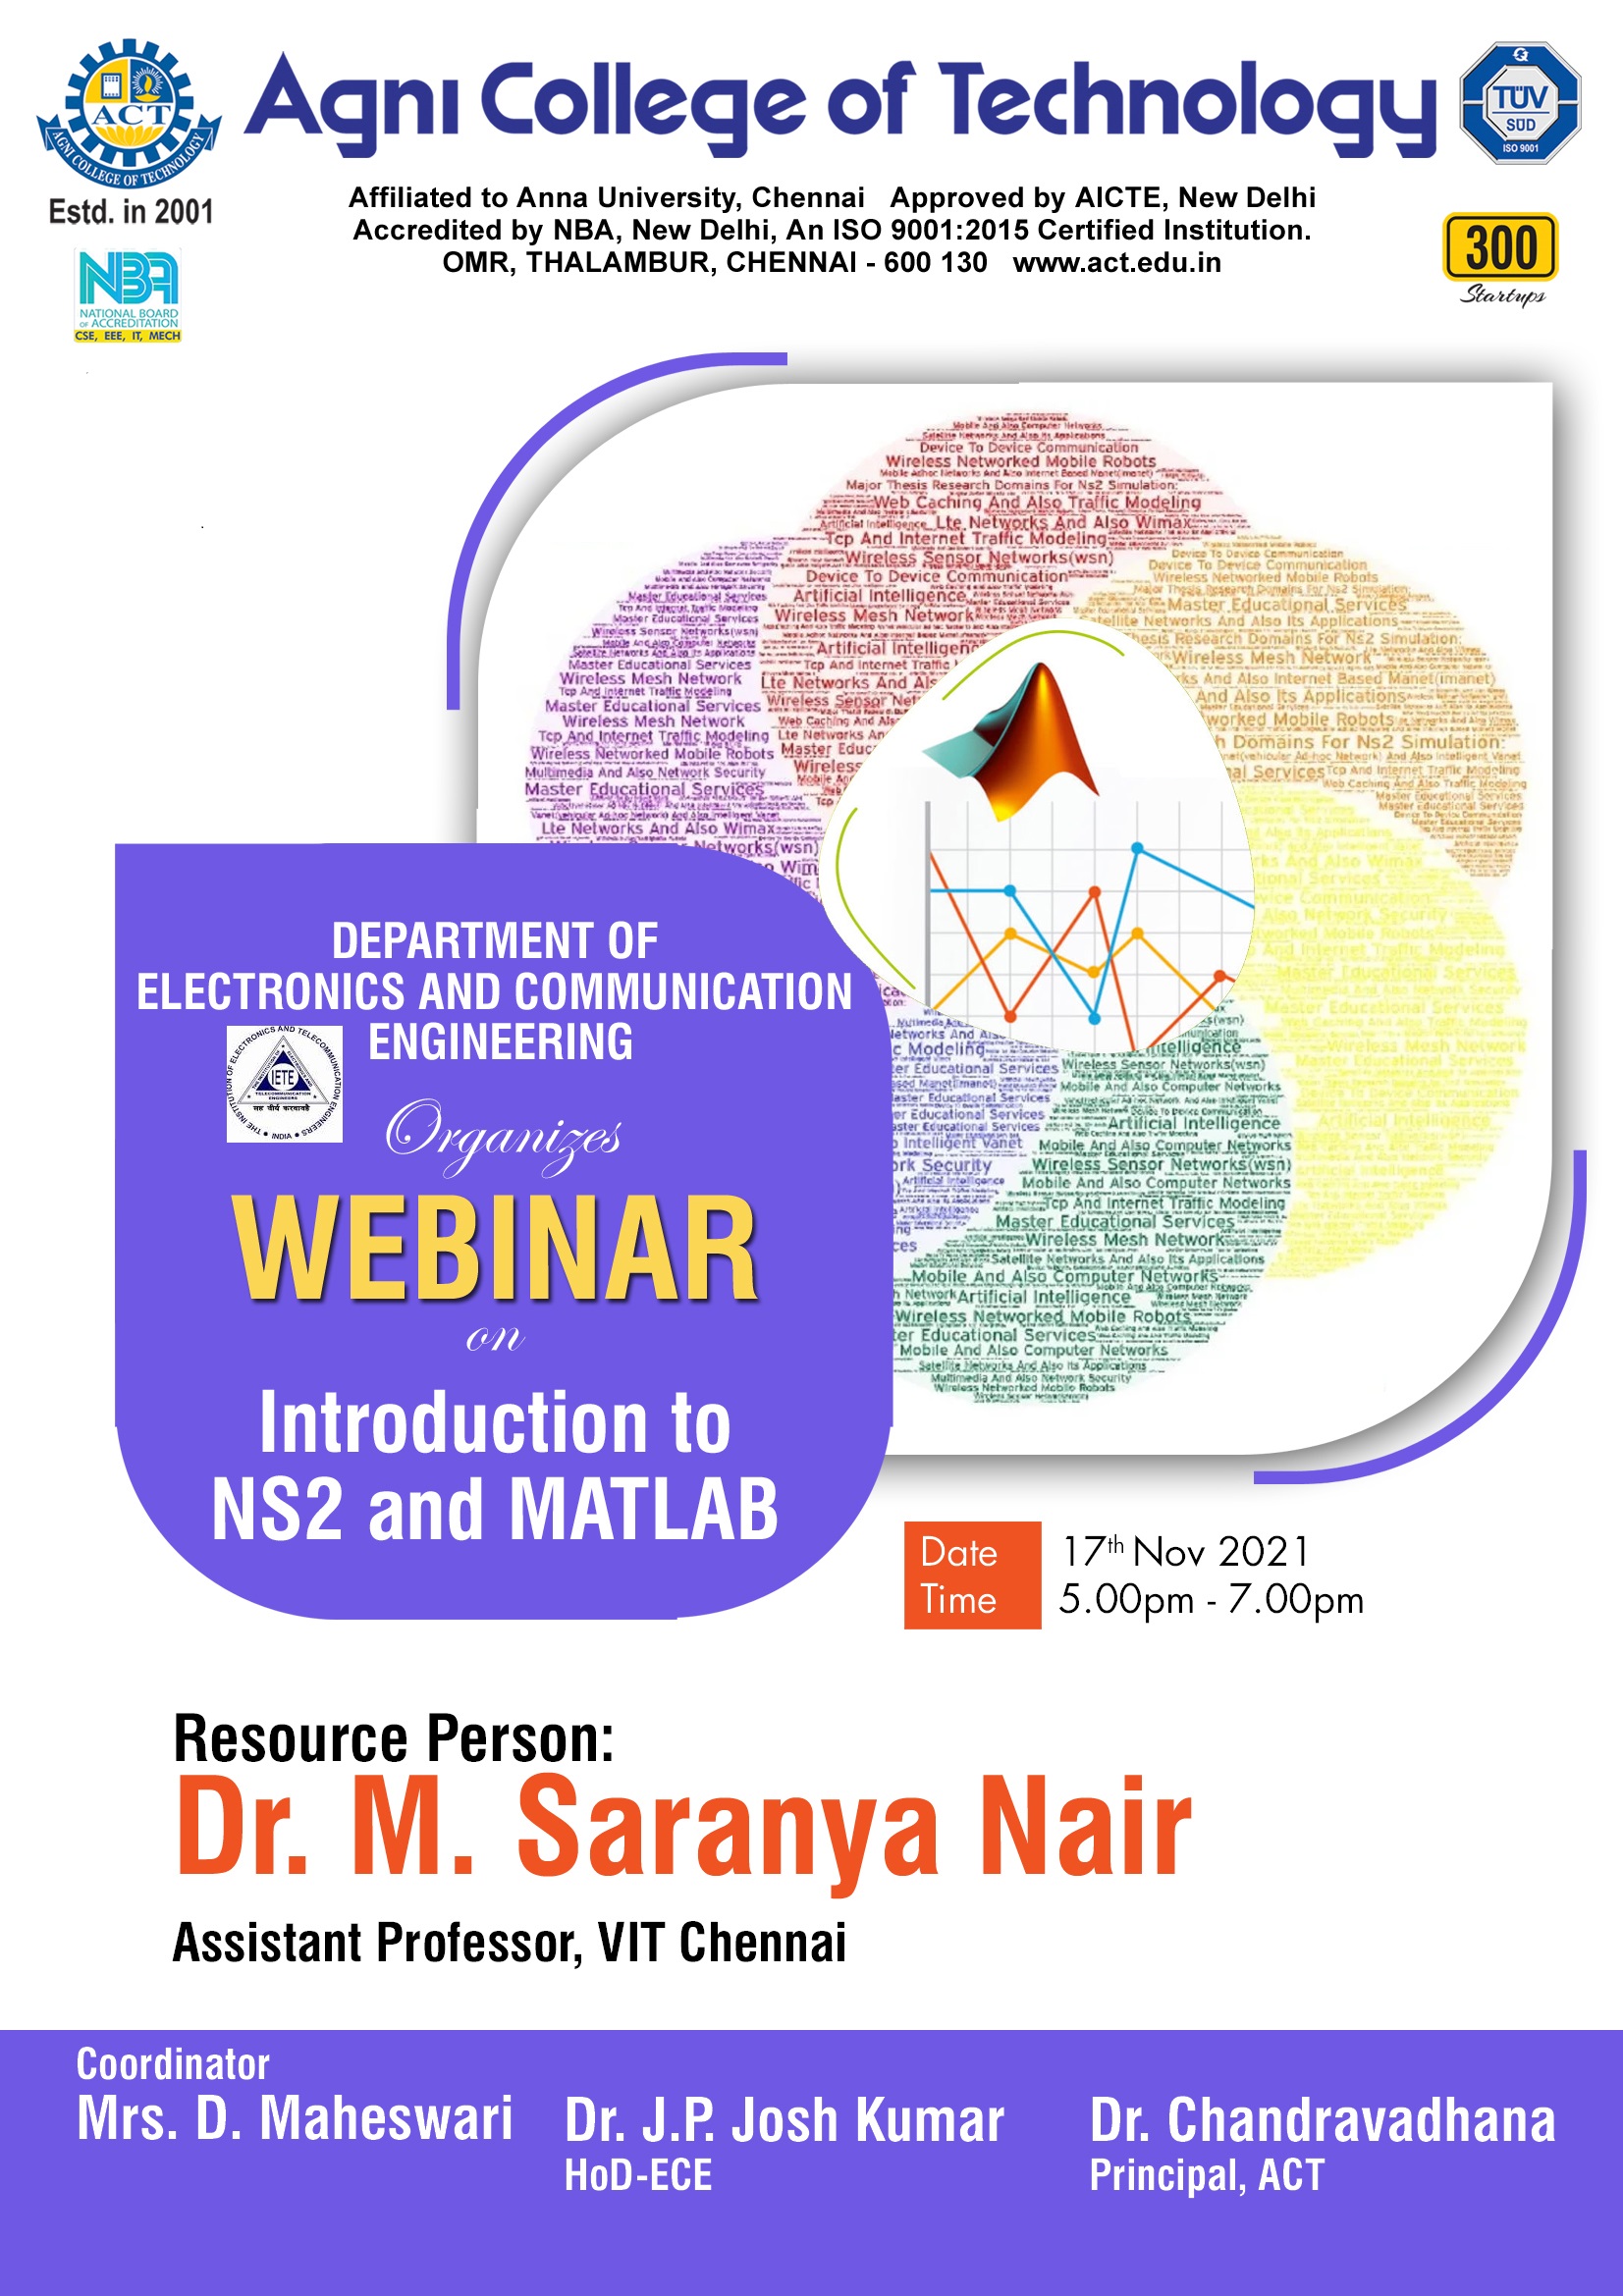 Webinar on Introduction to NS2 and MATLAB